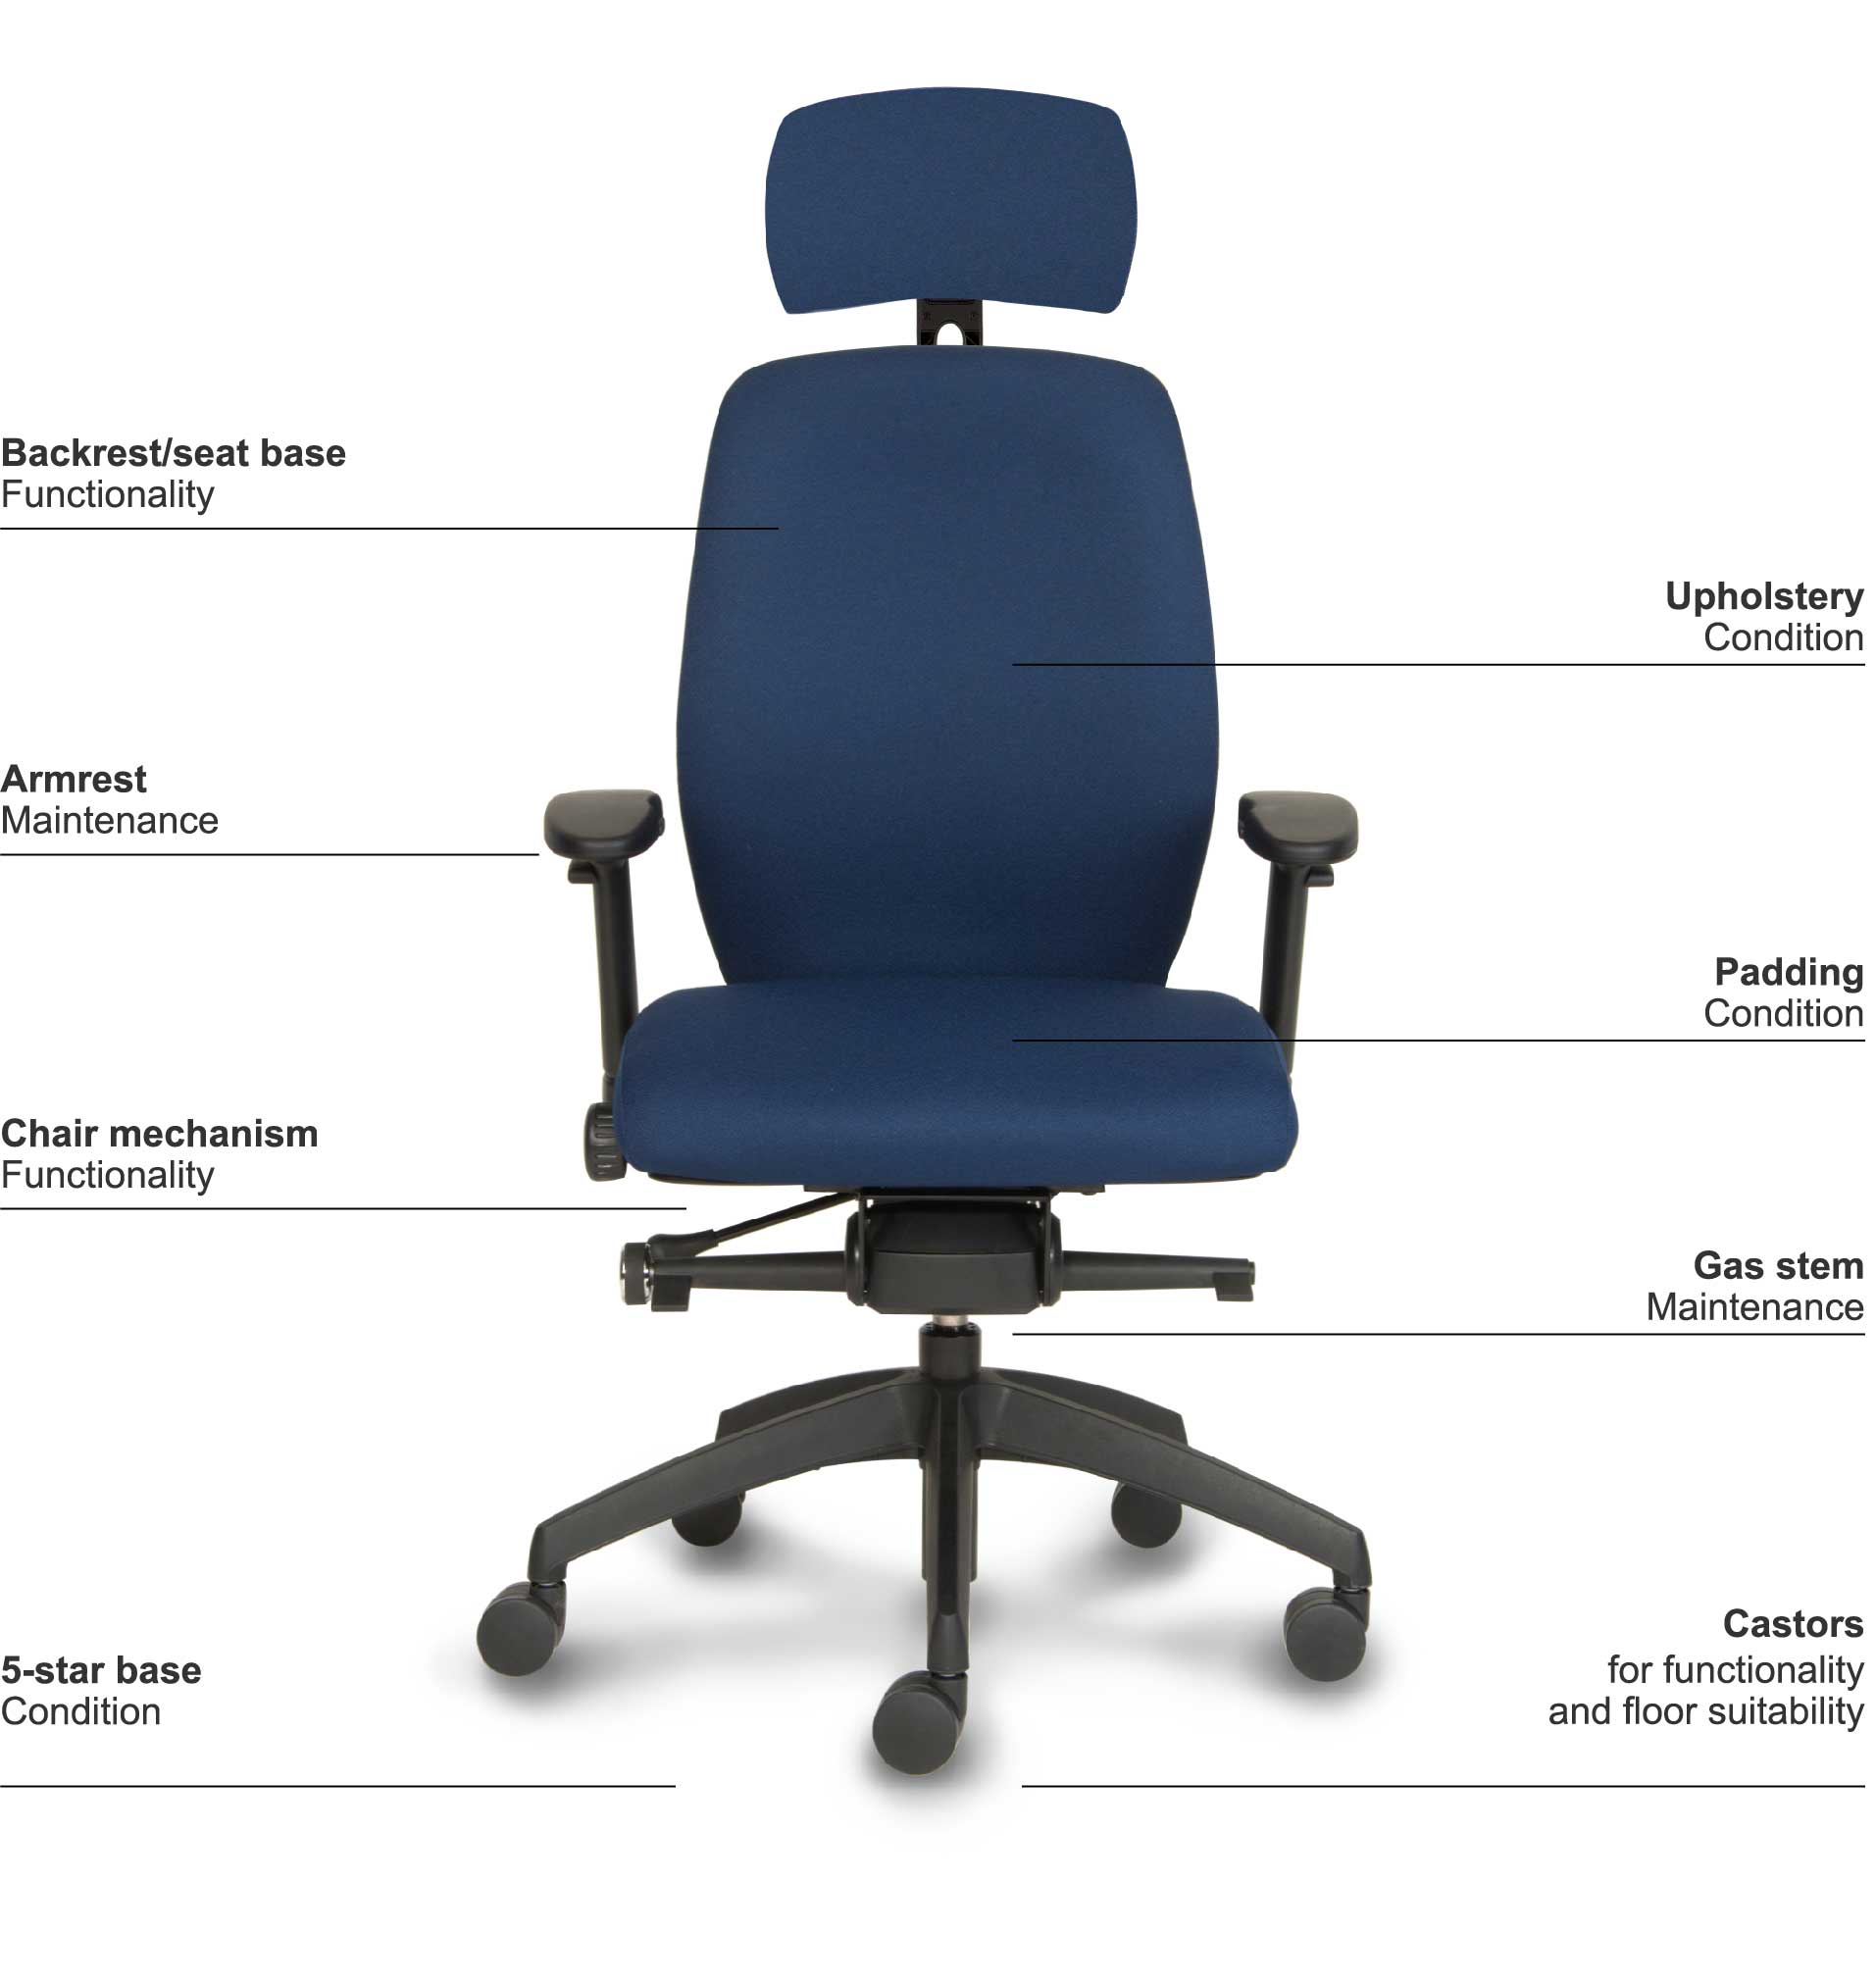 What gets checked in a chair audit?